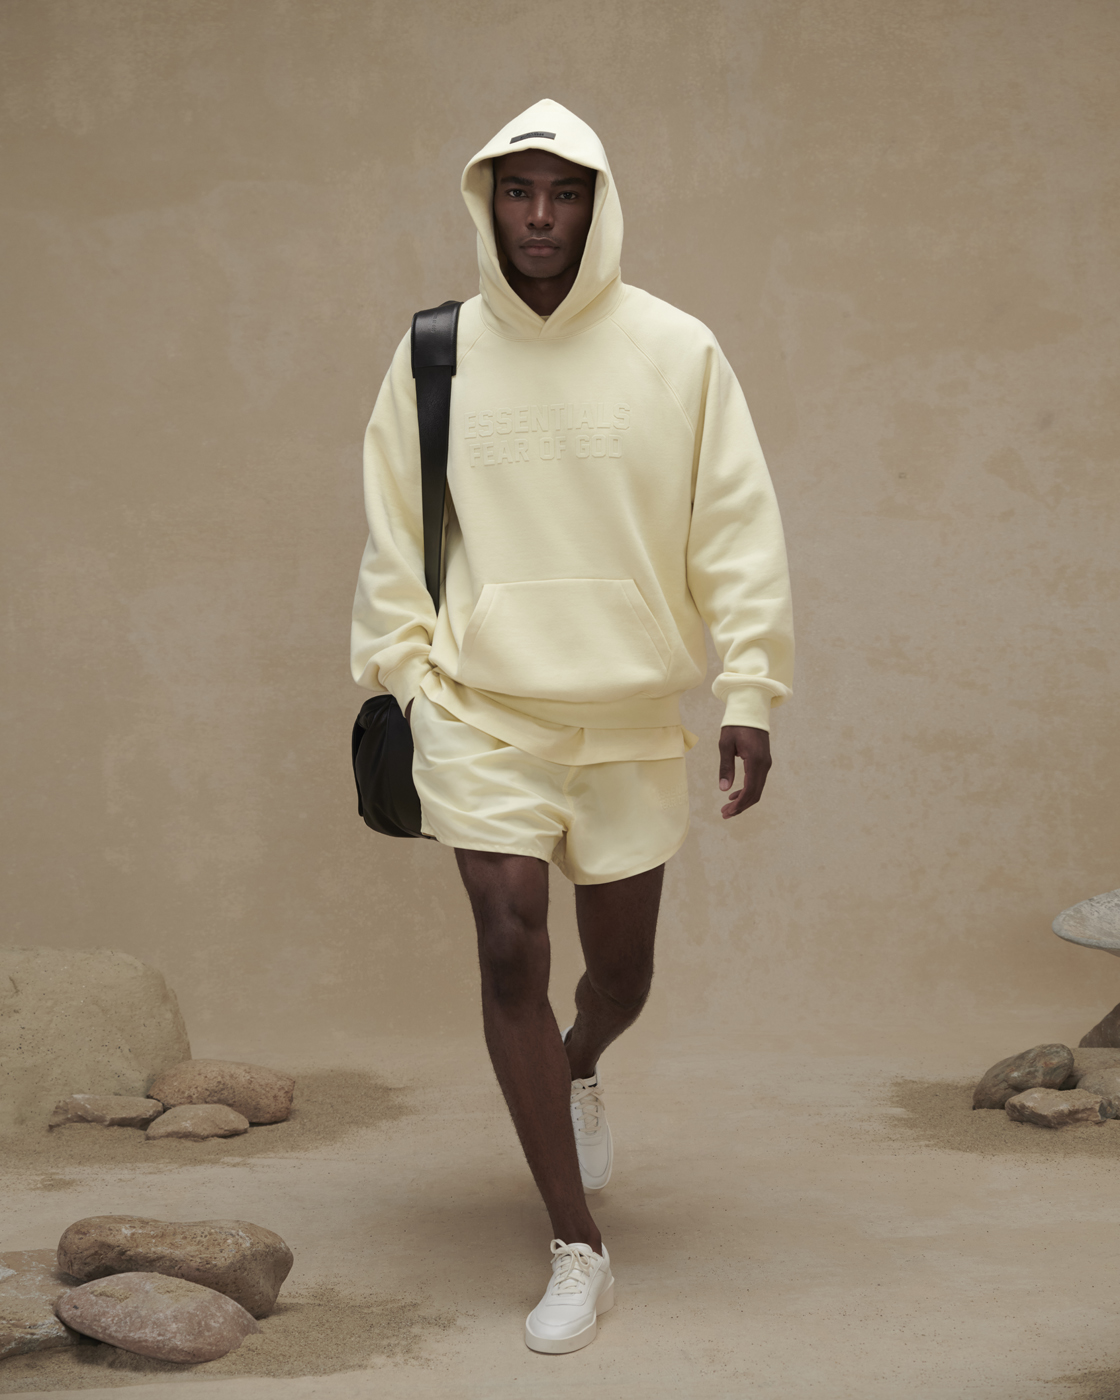 FOG ESSENTIALS' Fall 2022 Clothing Collection Goes Huge